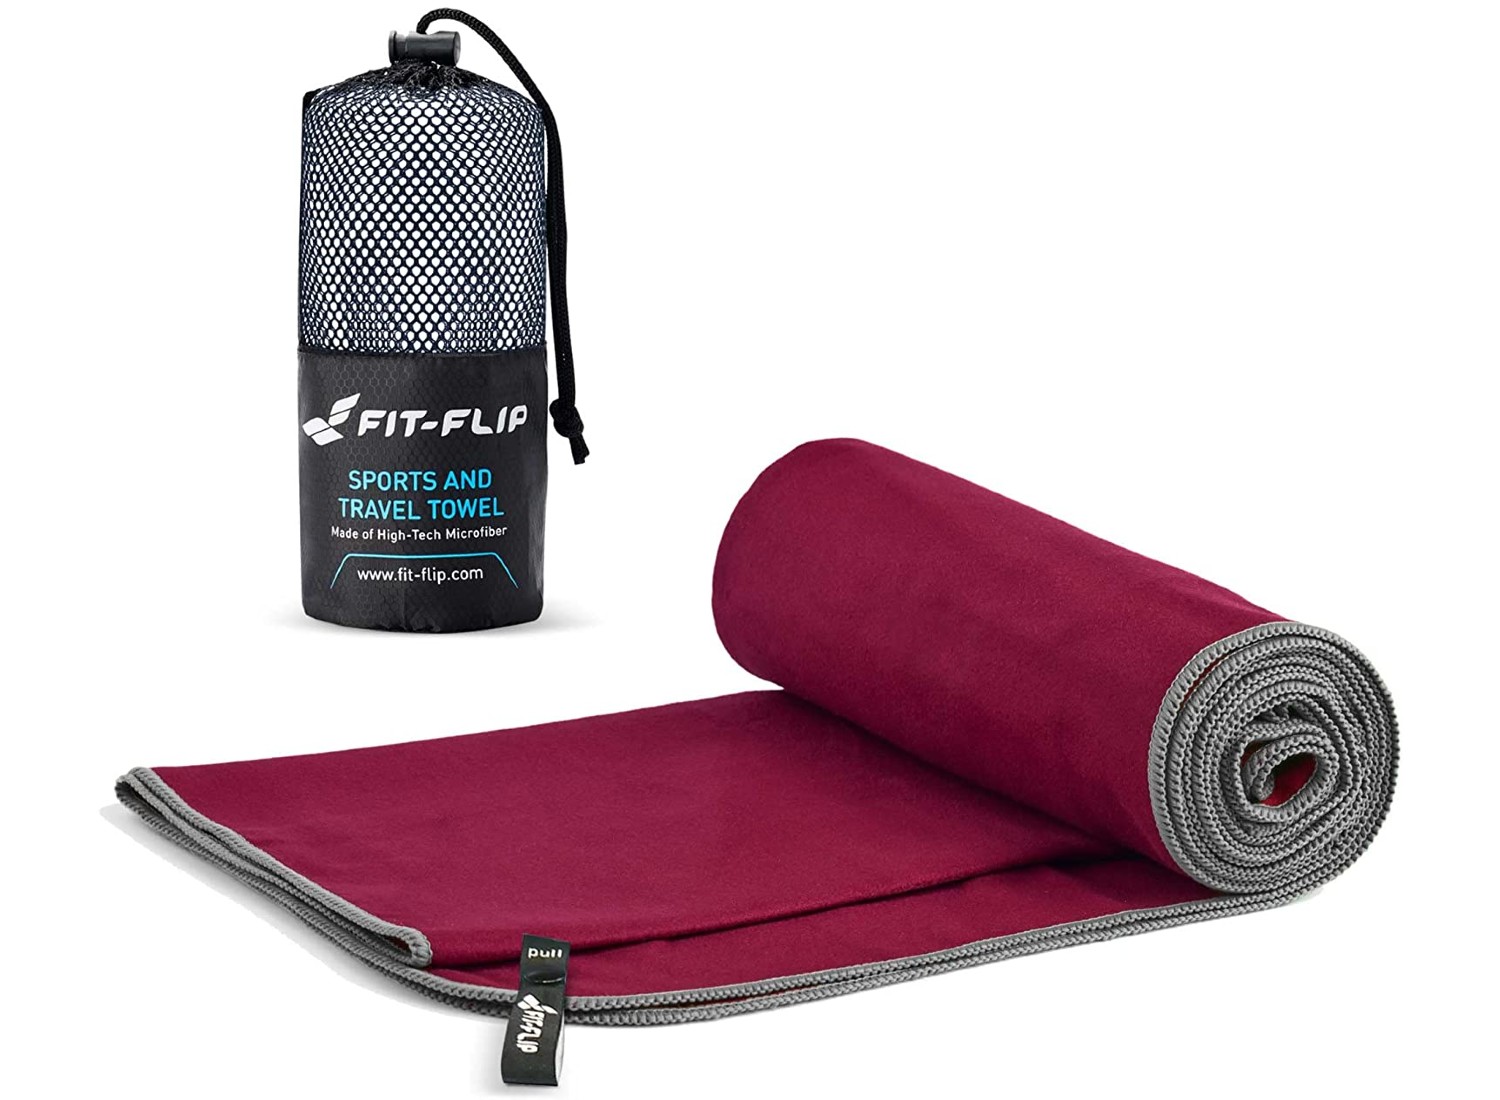 fast drying towel review